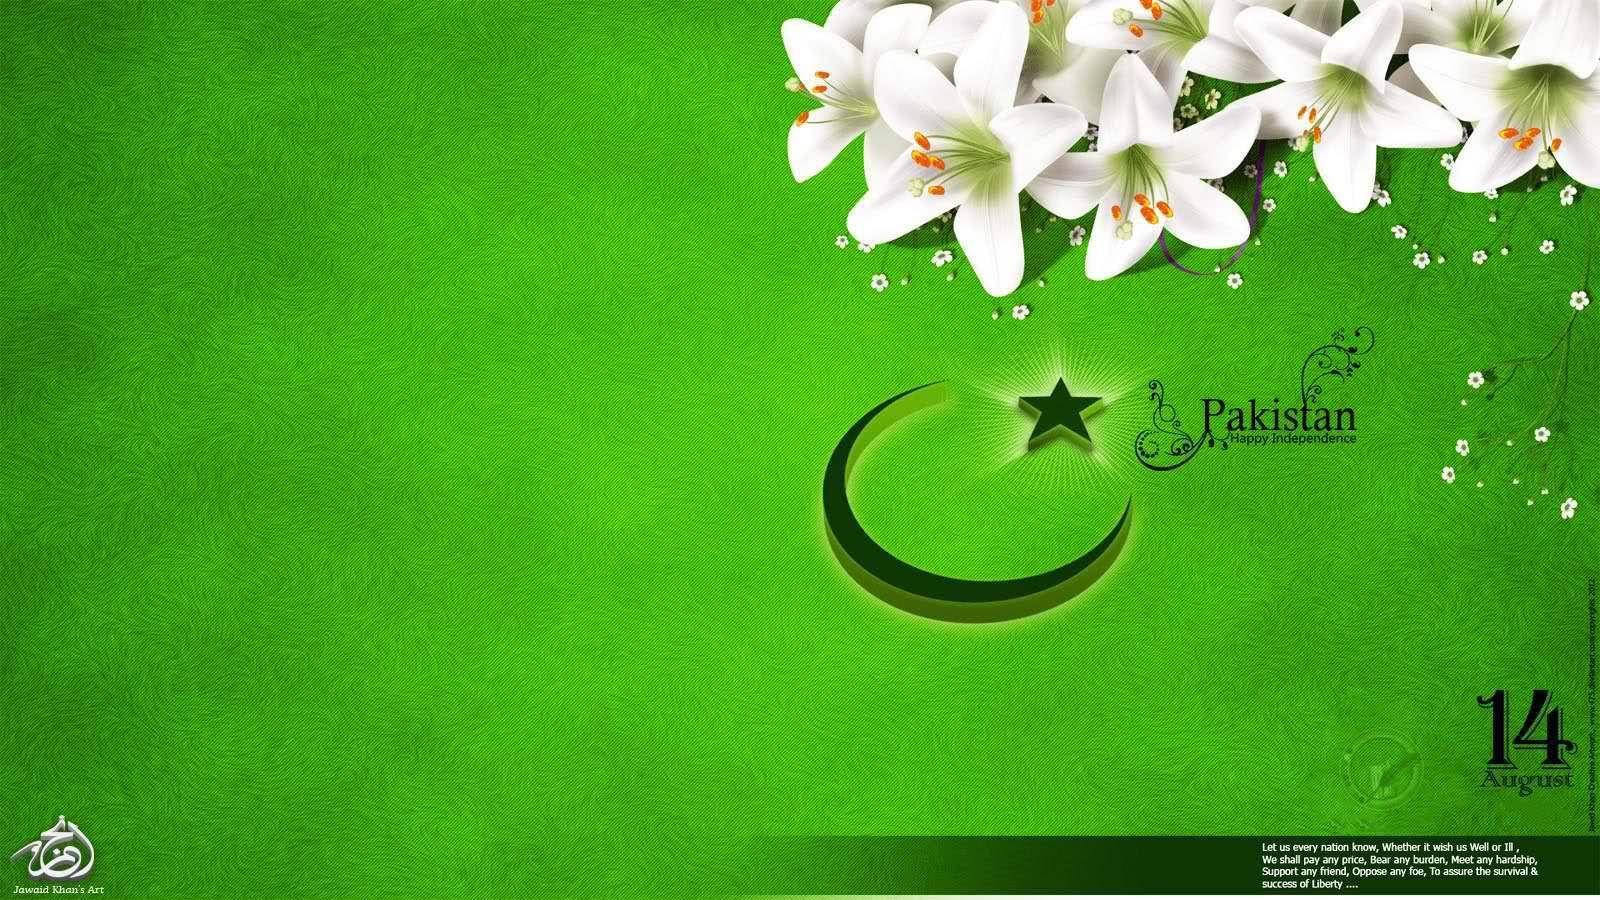 Pakistan Independence Day 14th August Template  PosterMyWall